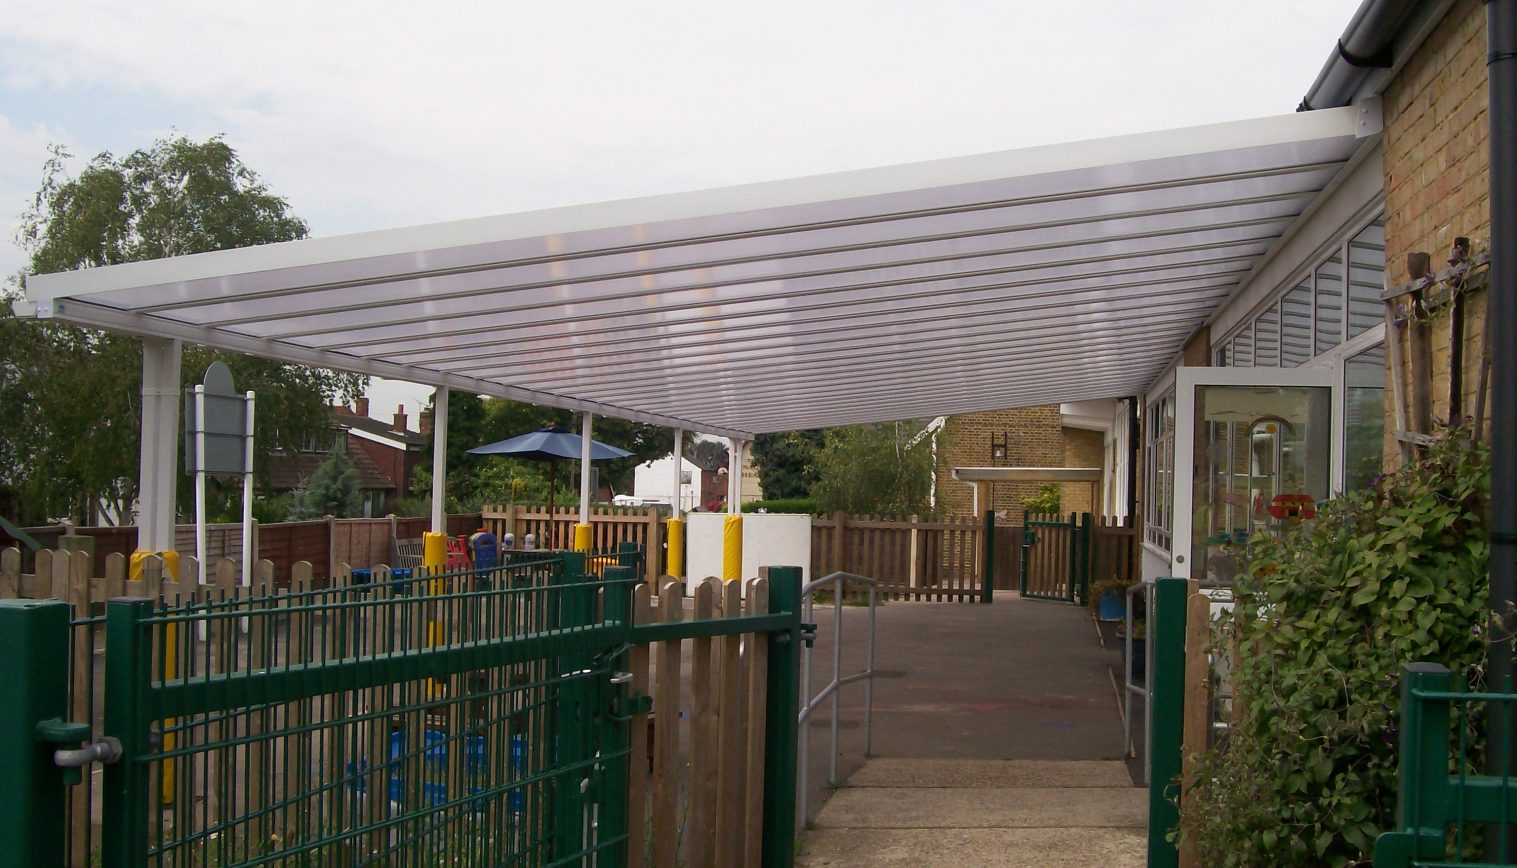 Moreton C of E Primary School – Wall Mounted Canopy